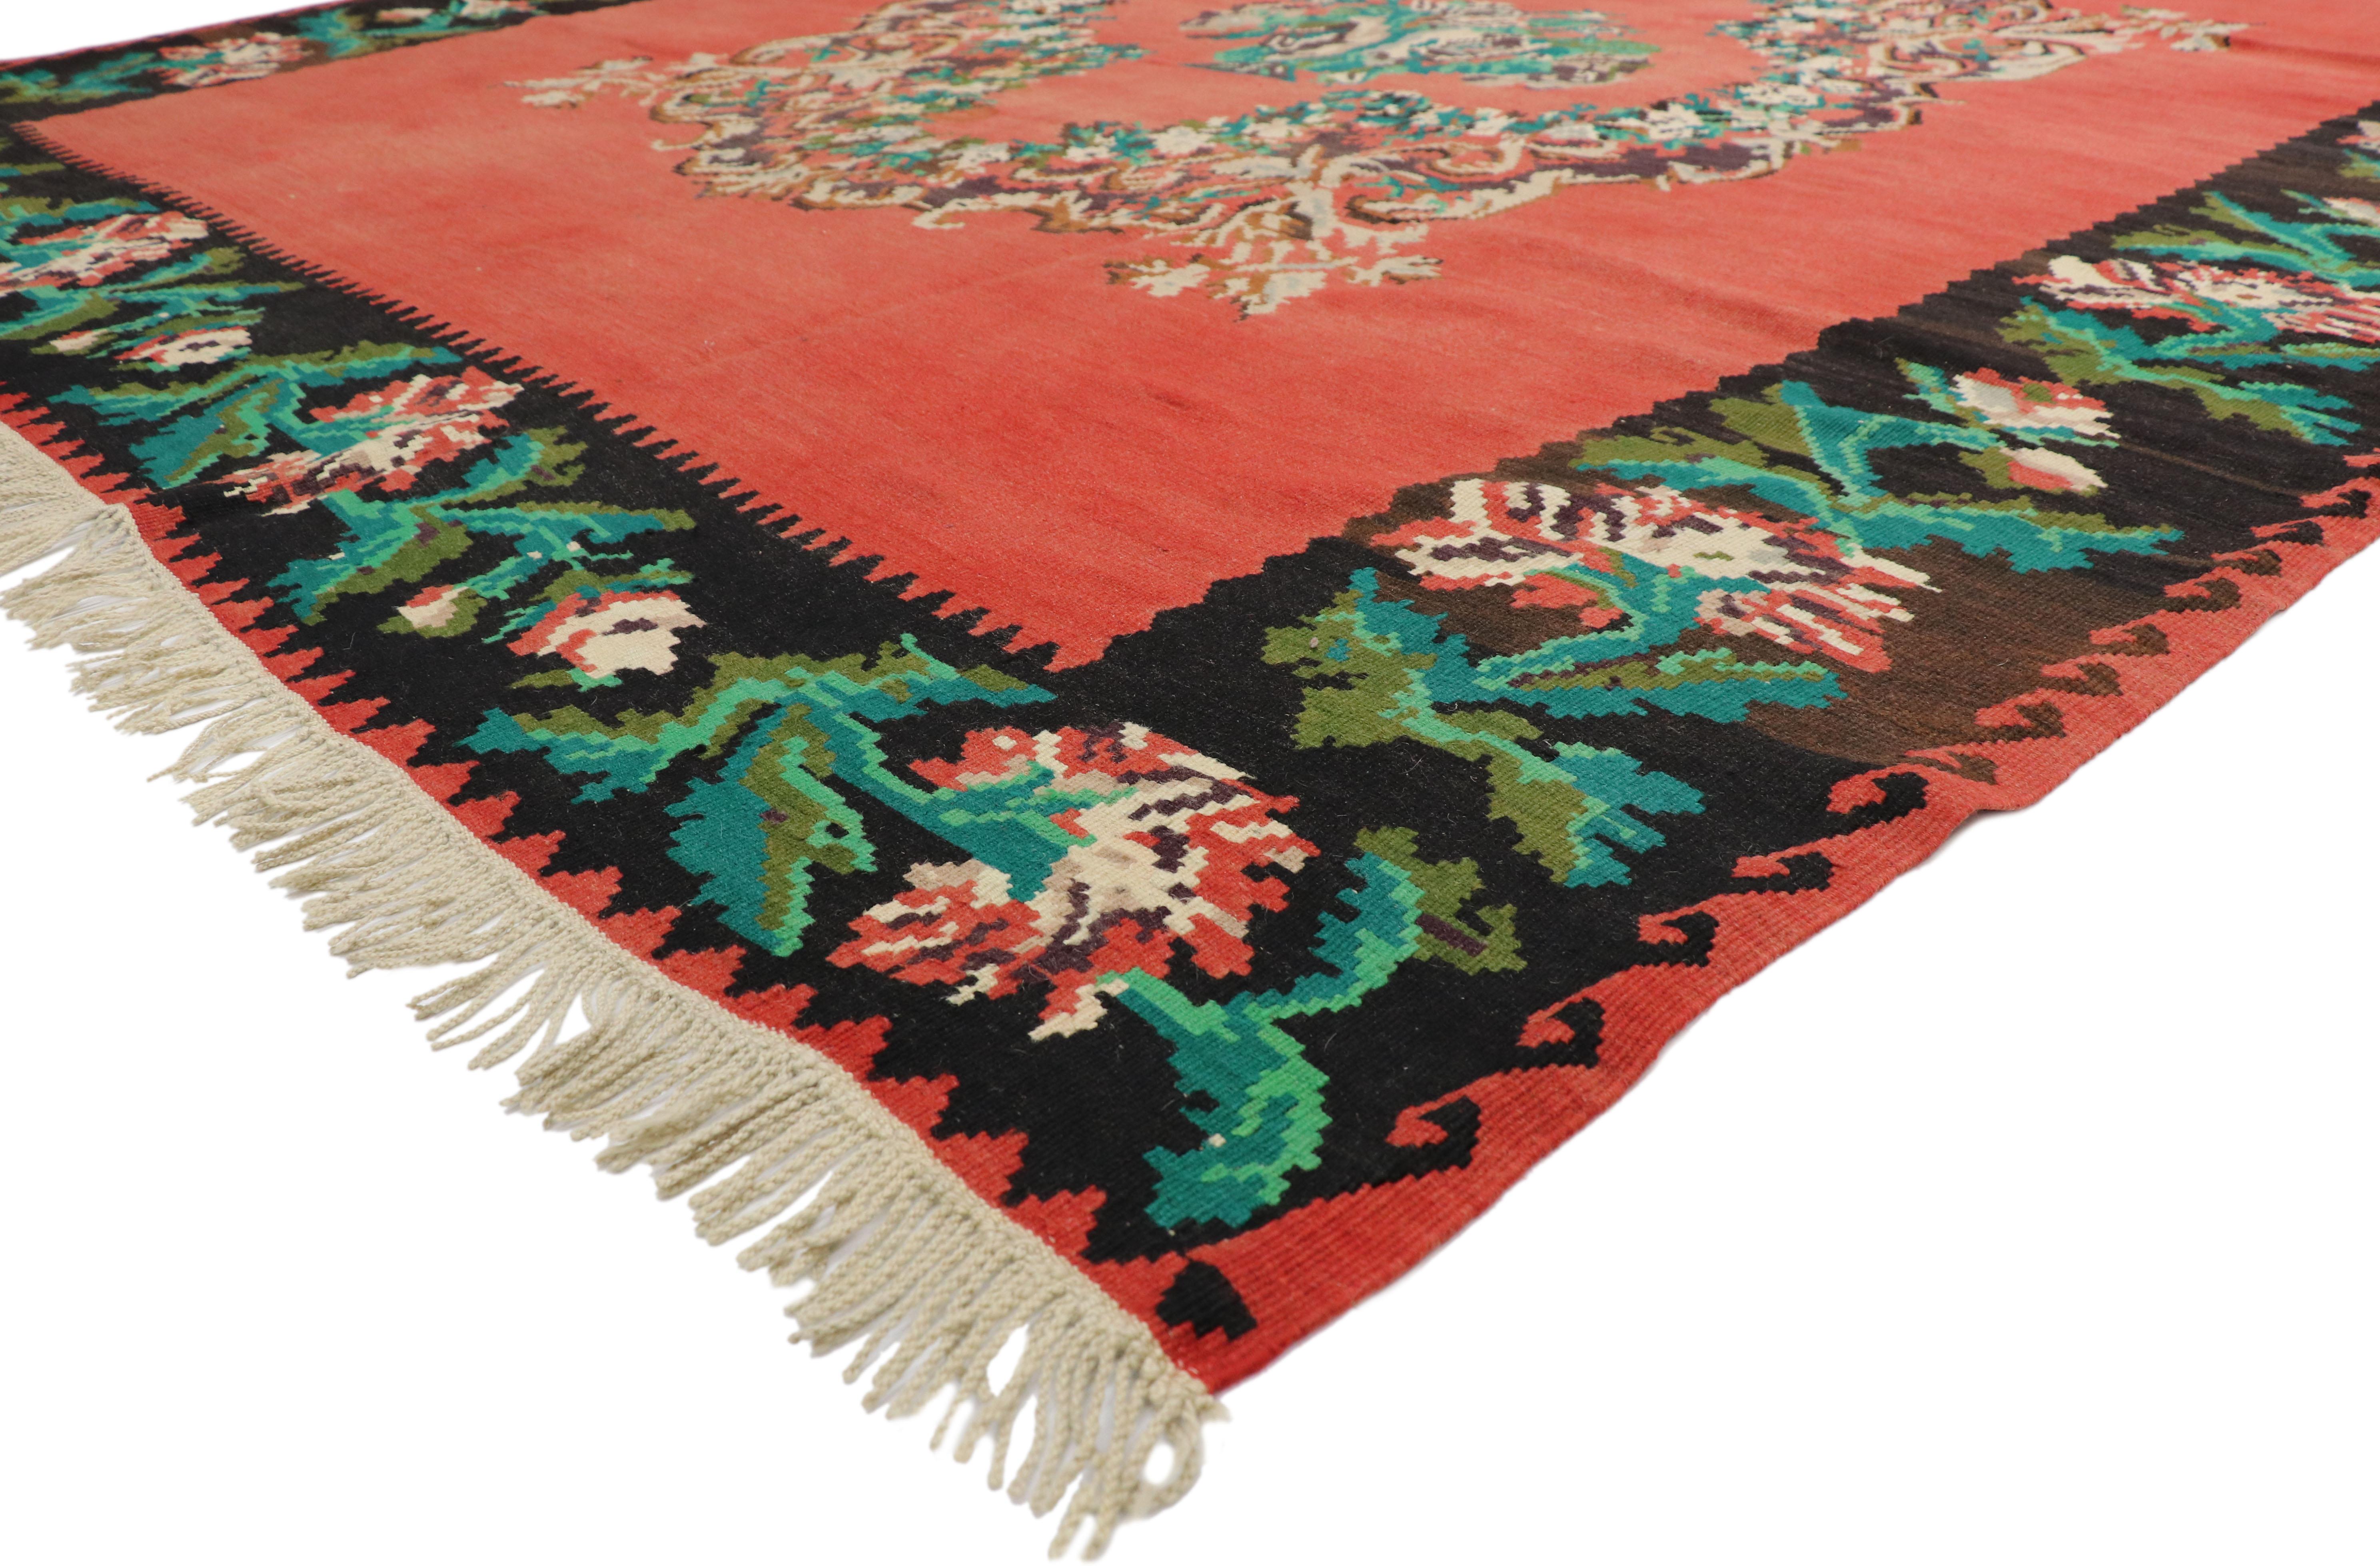 70271 Vintage Floral Turkish Kilim Rug with Chintz Style and Bessarabian Rose Design, Flat-weave Rose Kilim Rug. Drawing inspiration from Mario Buatta and Chintz style, this hand-woven floral Turkish kilim rug gives a lively and light hearted feel